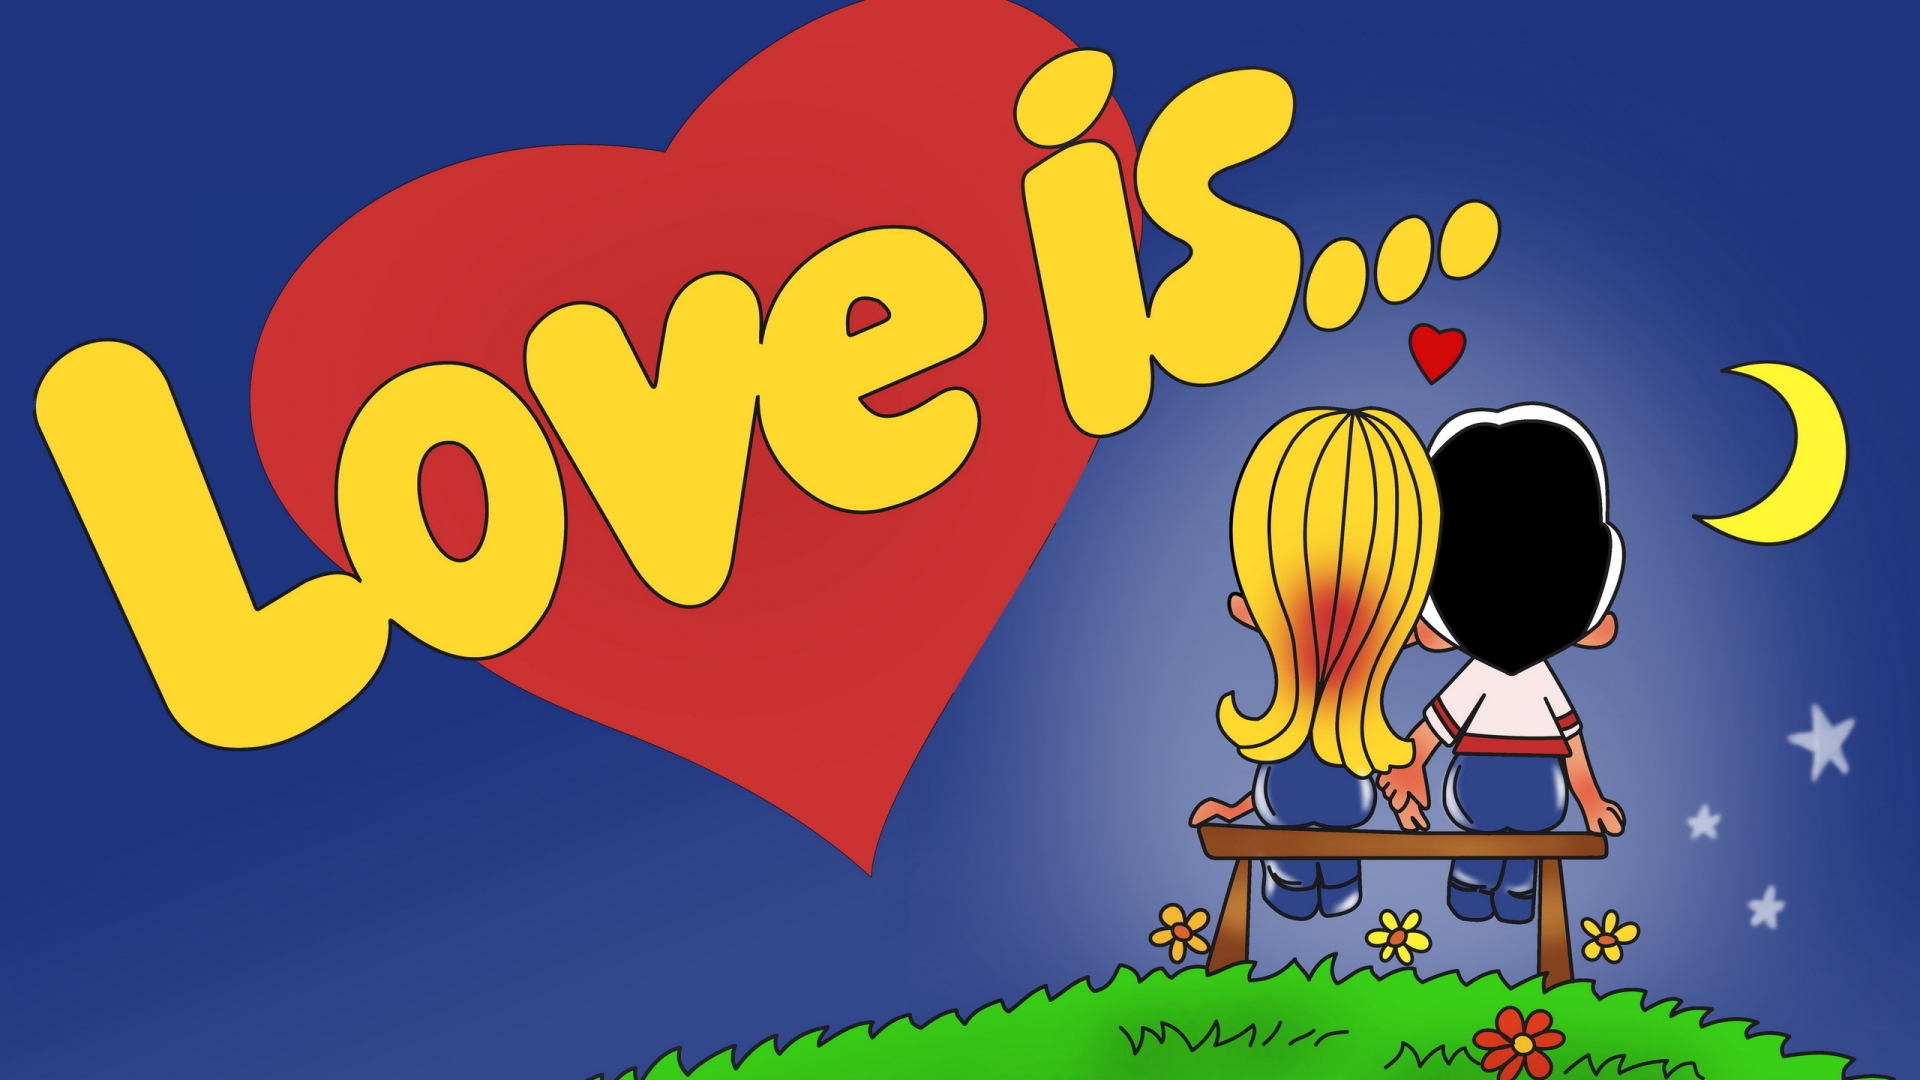 Love is for 1920 x 1080 HDTV 1080p resolution